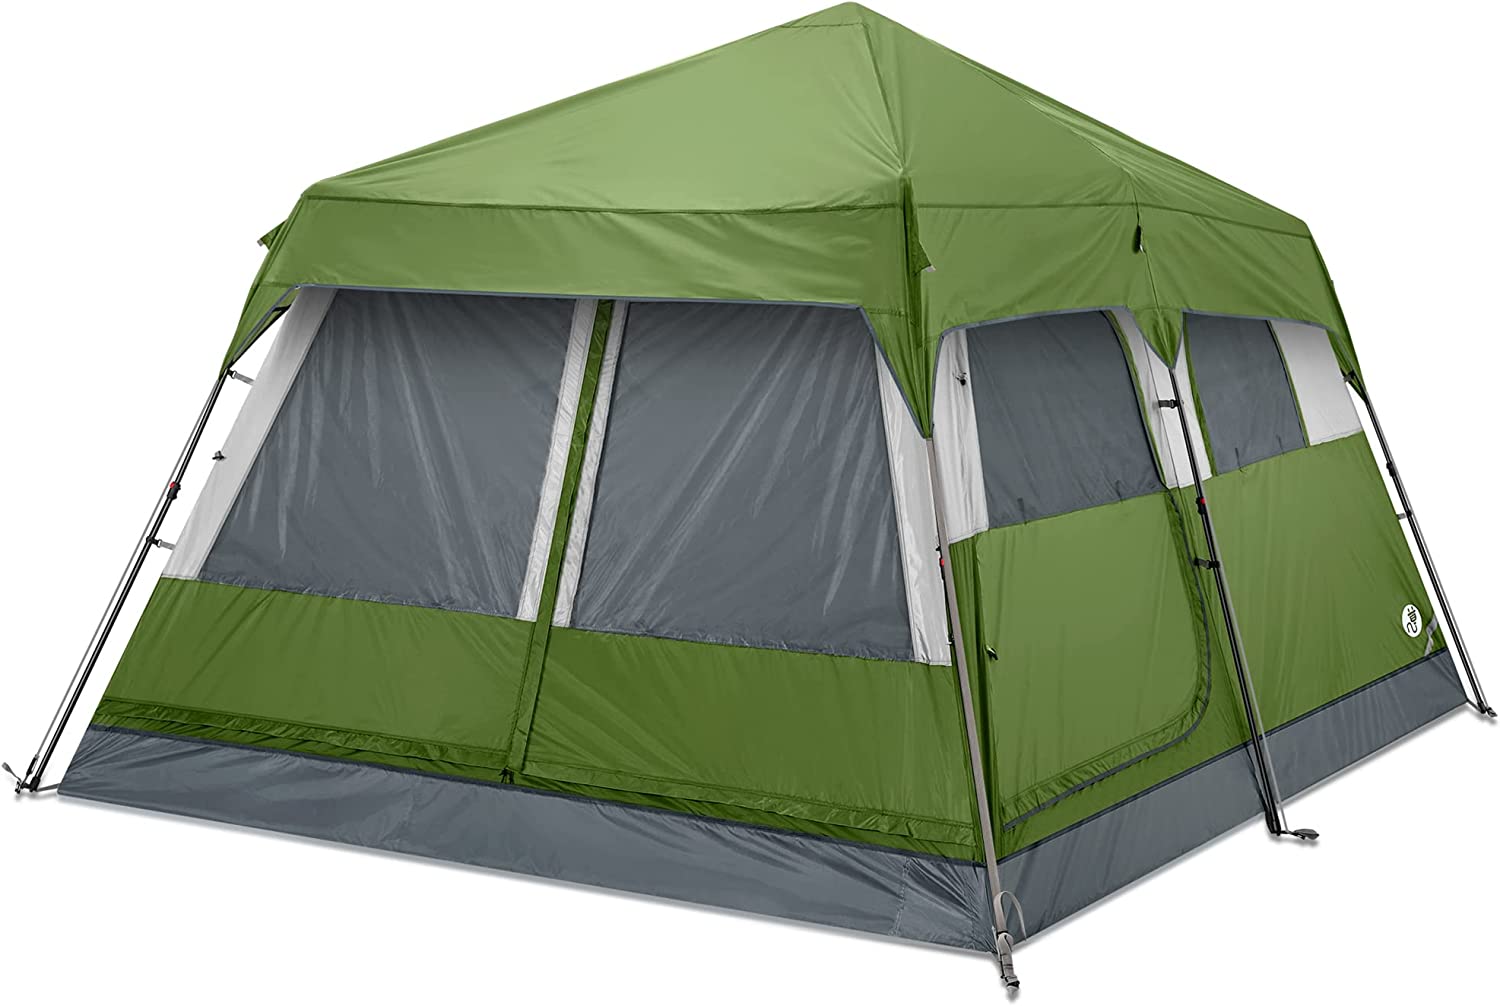 Gonex 6/10 Person Tents for Camping, Instant Tent Automatic Glamping Tent Waterproof Windproof Easy Set Up in Few Minutes Ideal for Family Car Trip, Festival Gathering and Picnic